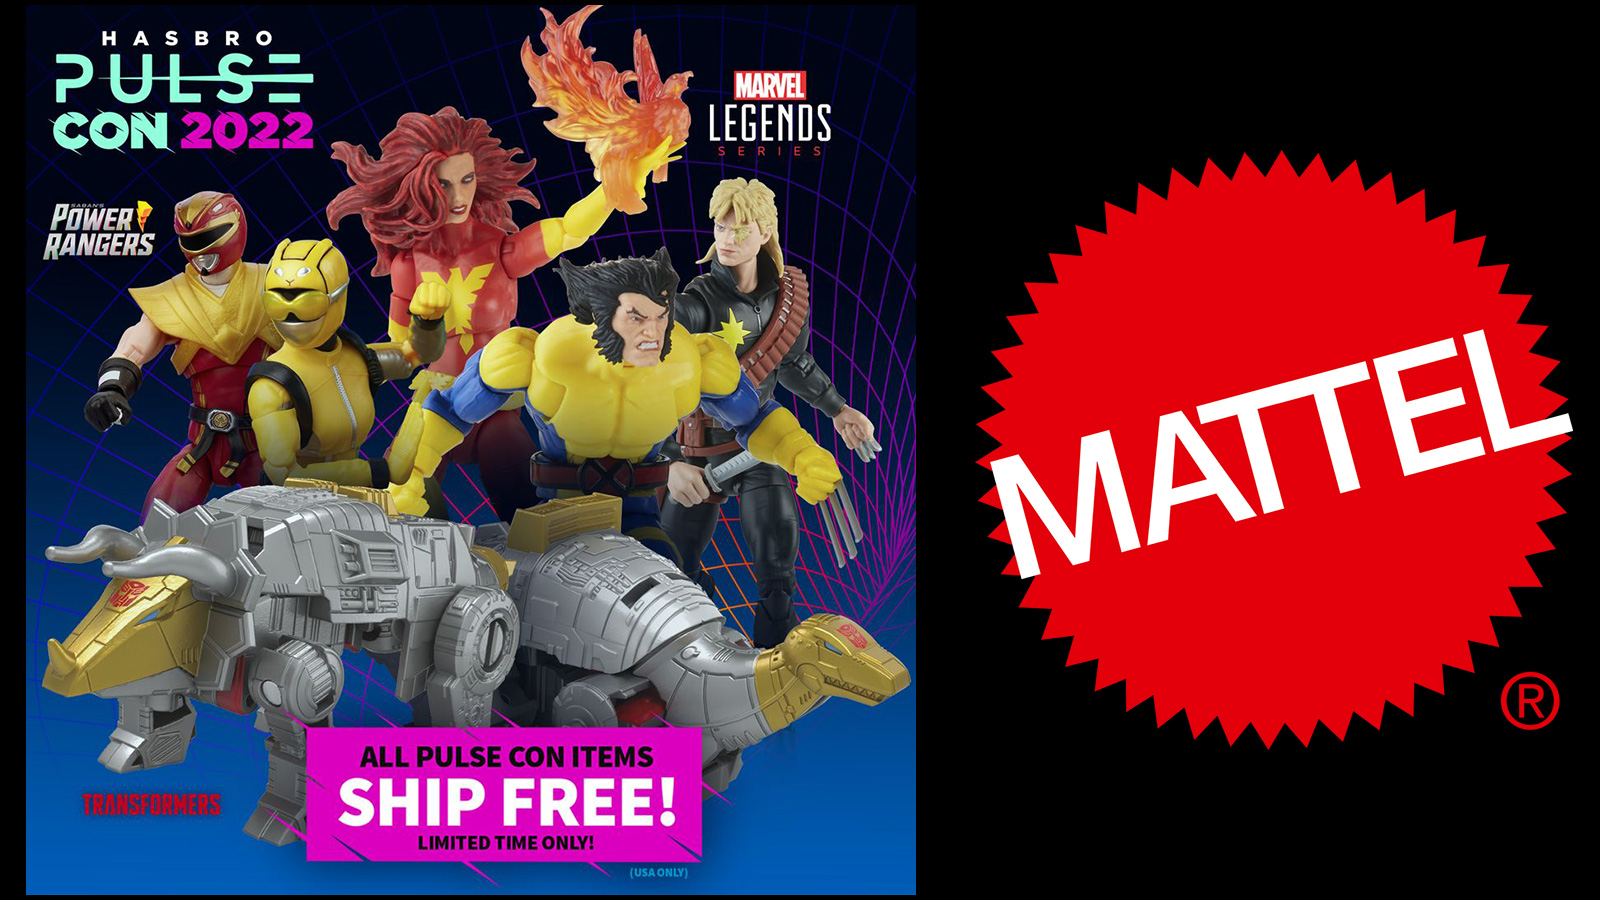 Preorder At Entertainment Earth - New Hasbro Pulse Con 2022 Day 1 Reveals - Also Preorder New Mattel Products Starting 10/1 At 12AM ET (Midnight)